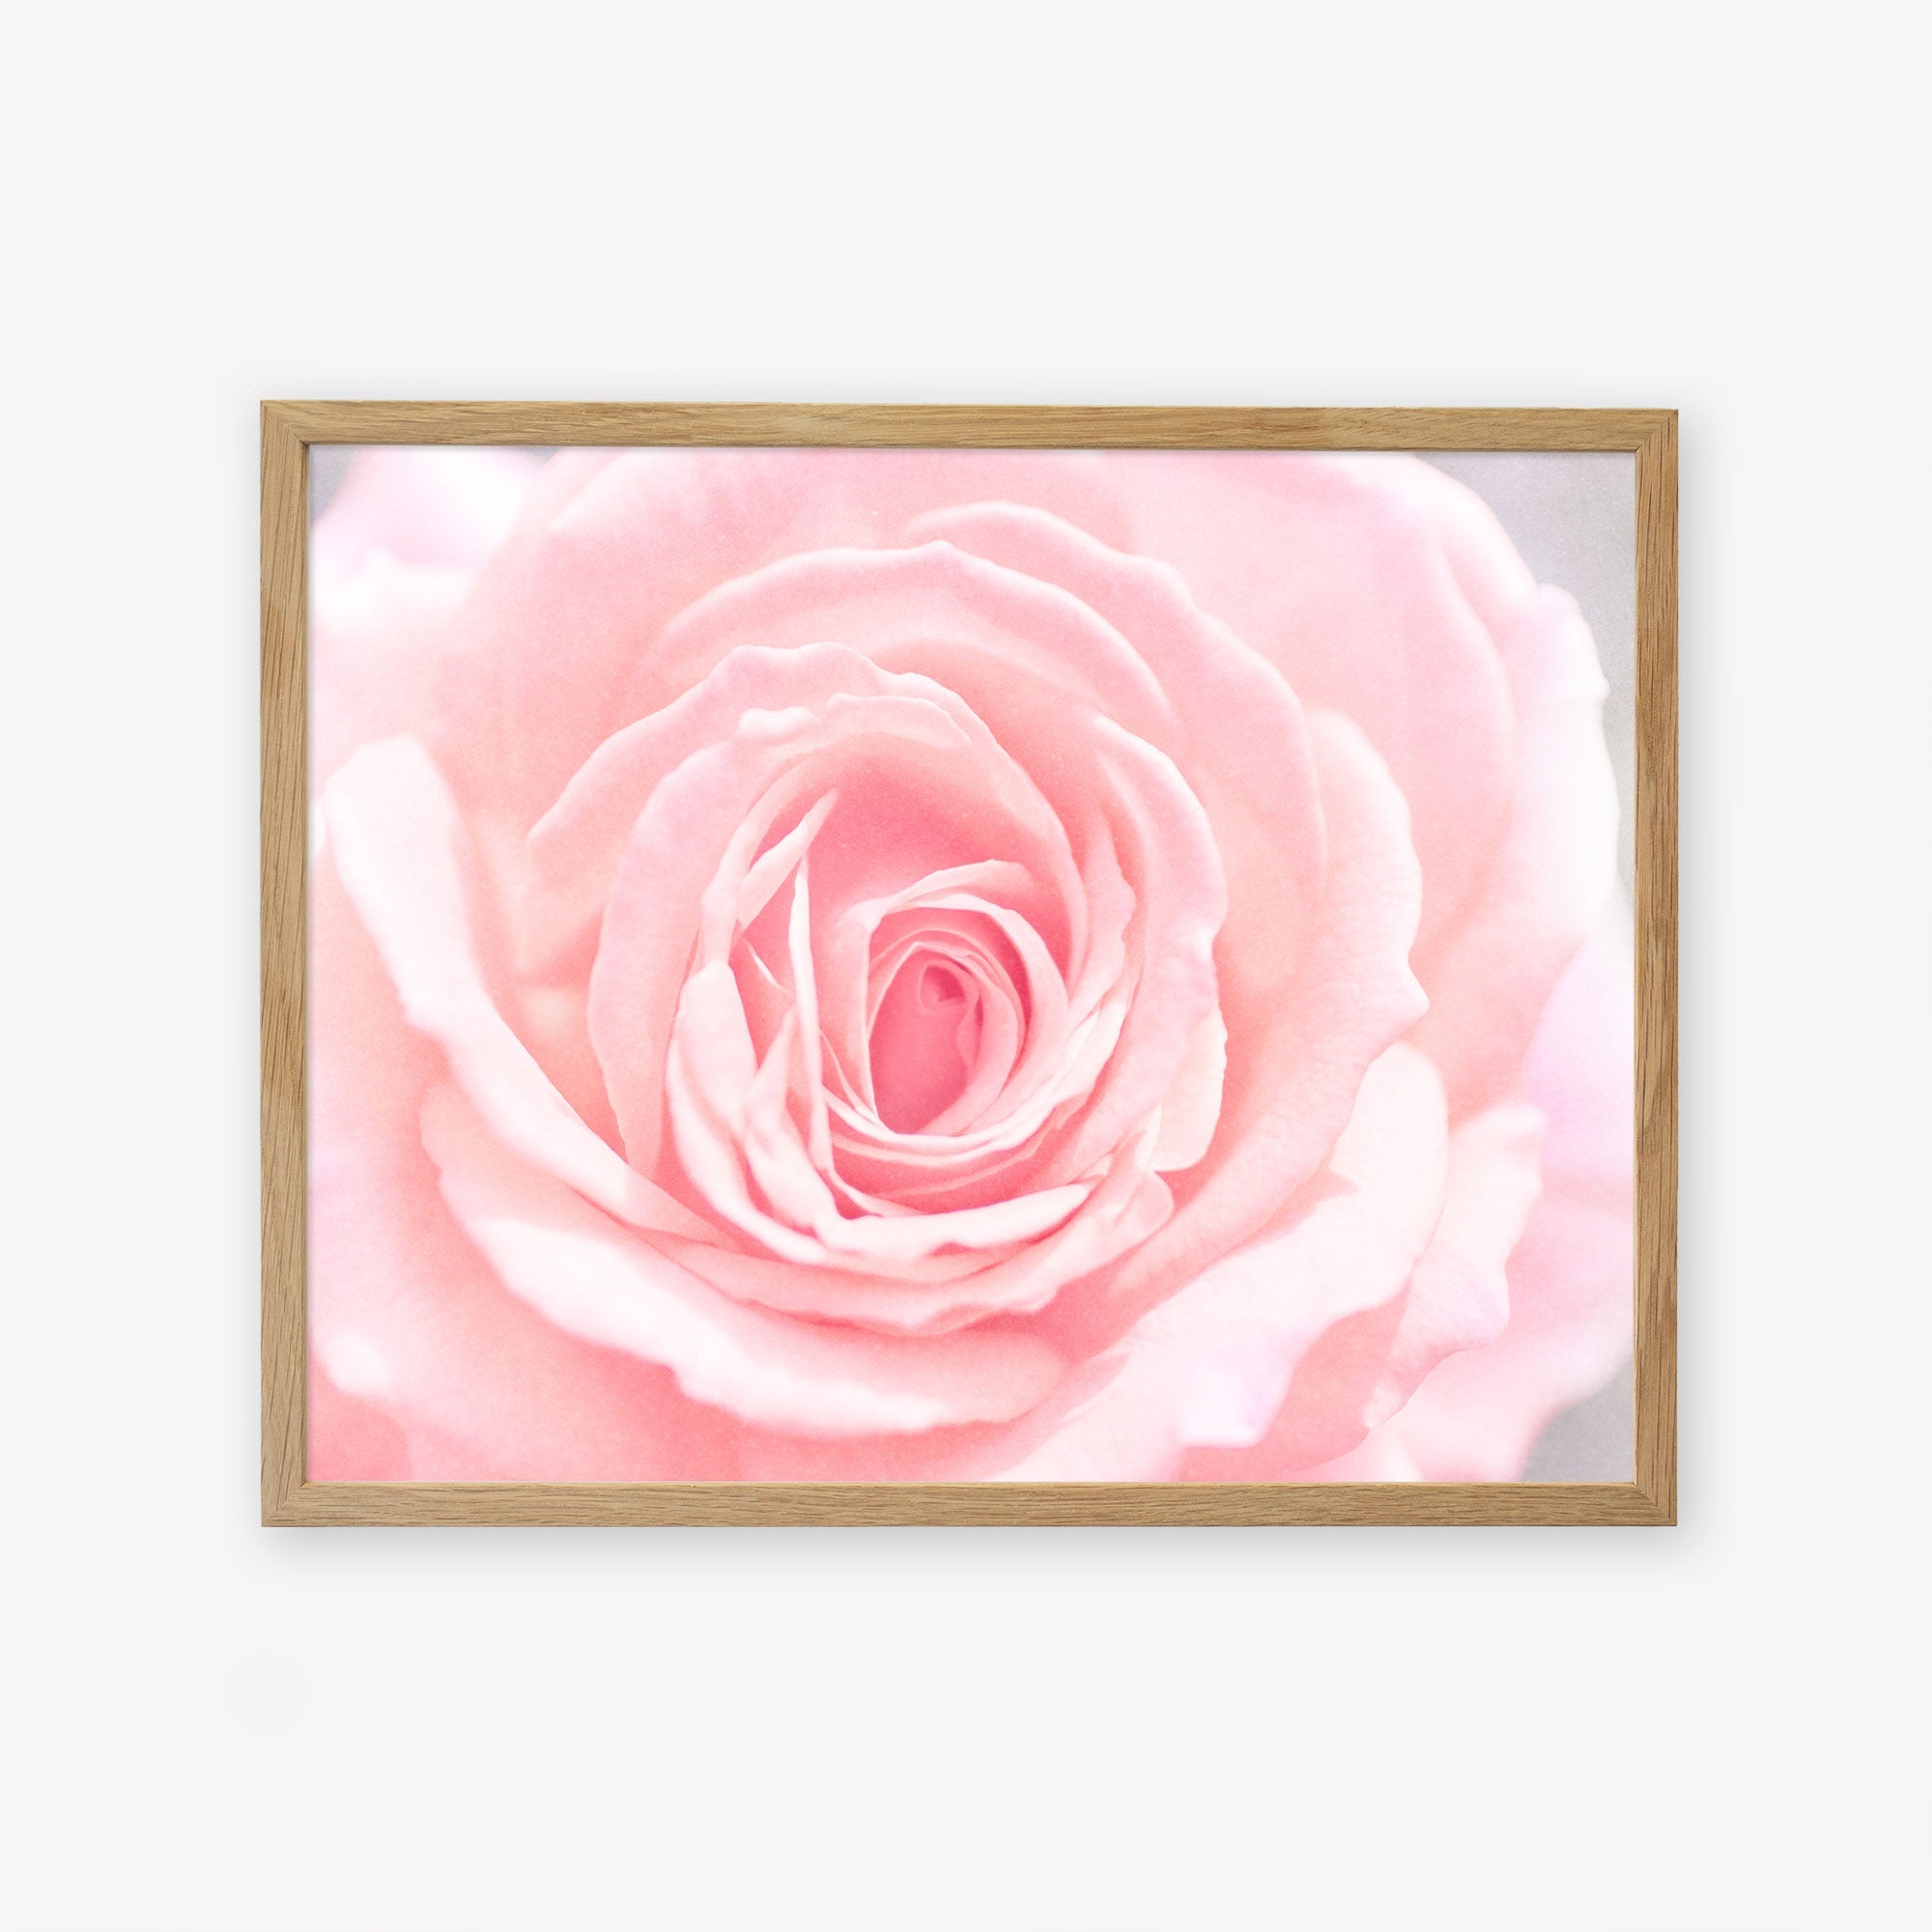 A framed image of Pink Rose Print by Offley Green, centered and filling the frame, with soft petals visually layered, displayed against a white background.